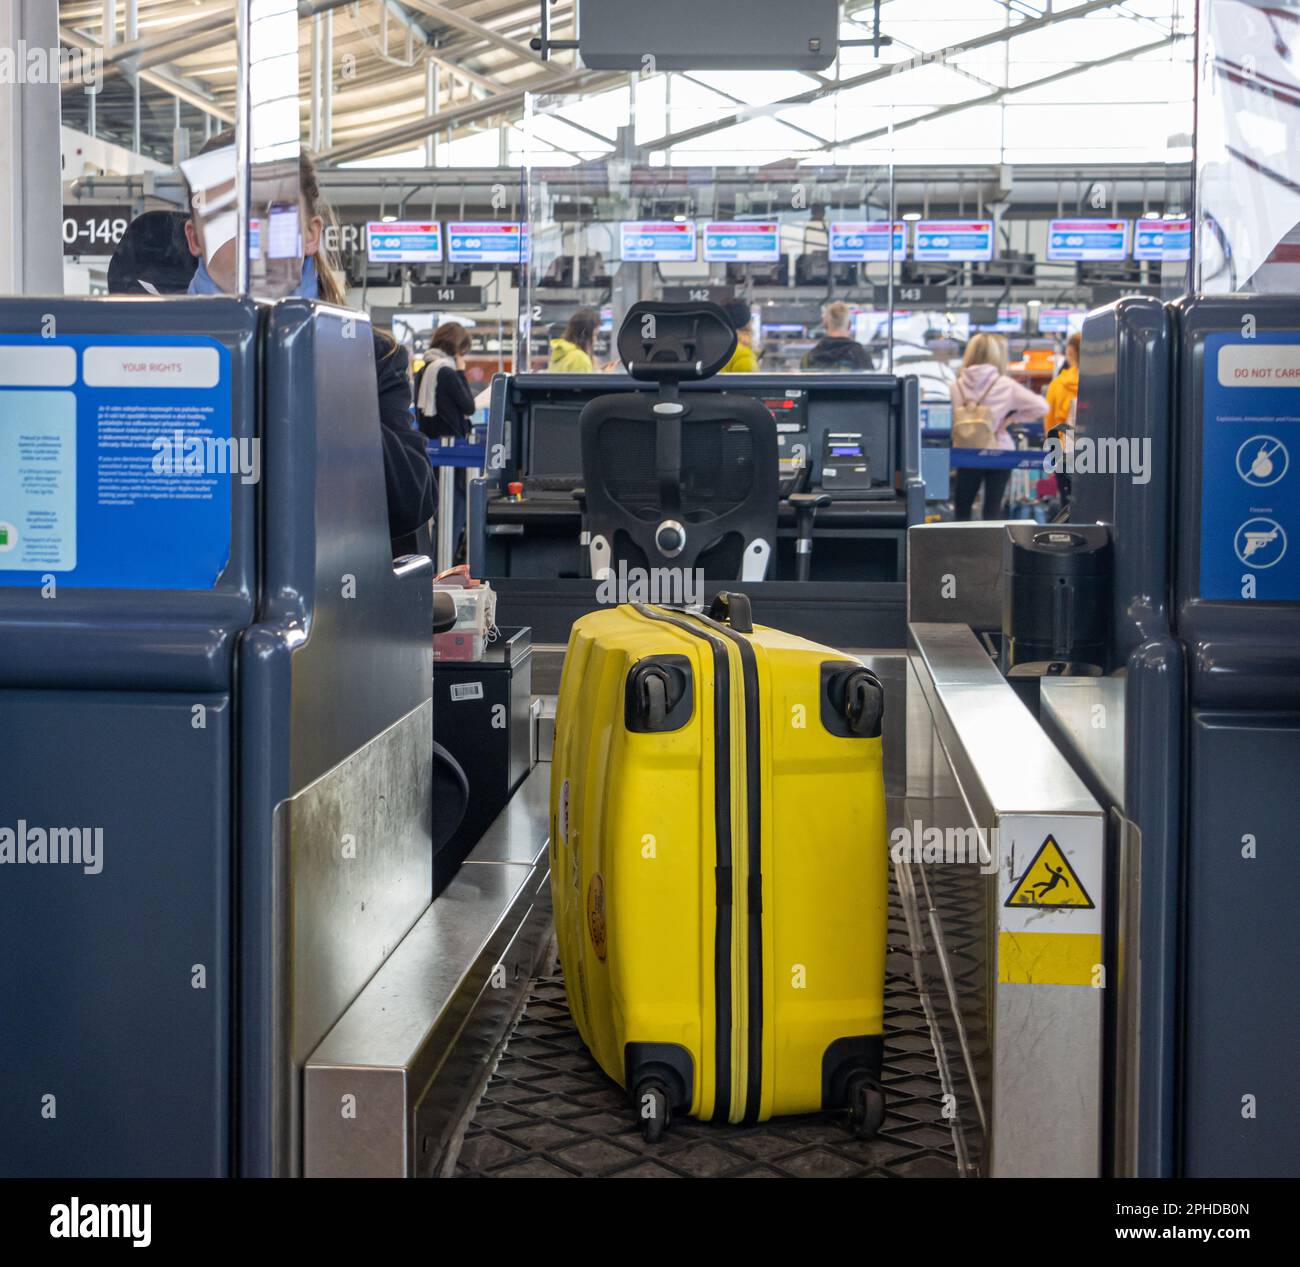 Passenger's yellow suitcase on a conveyor belt during check-in at an international airport Stock Photo